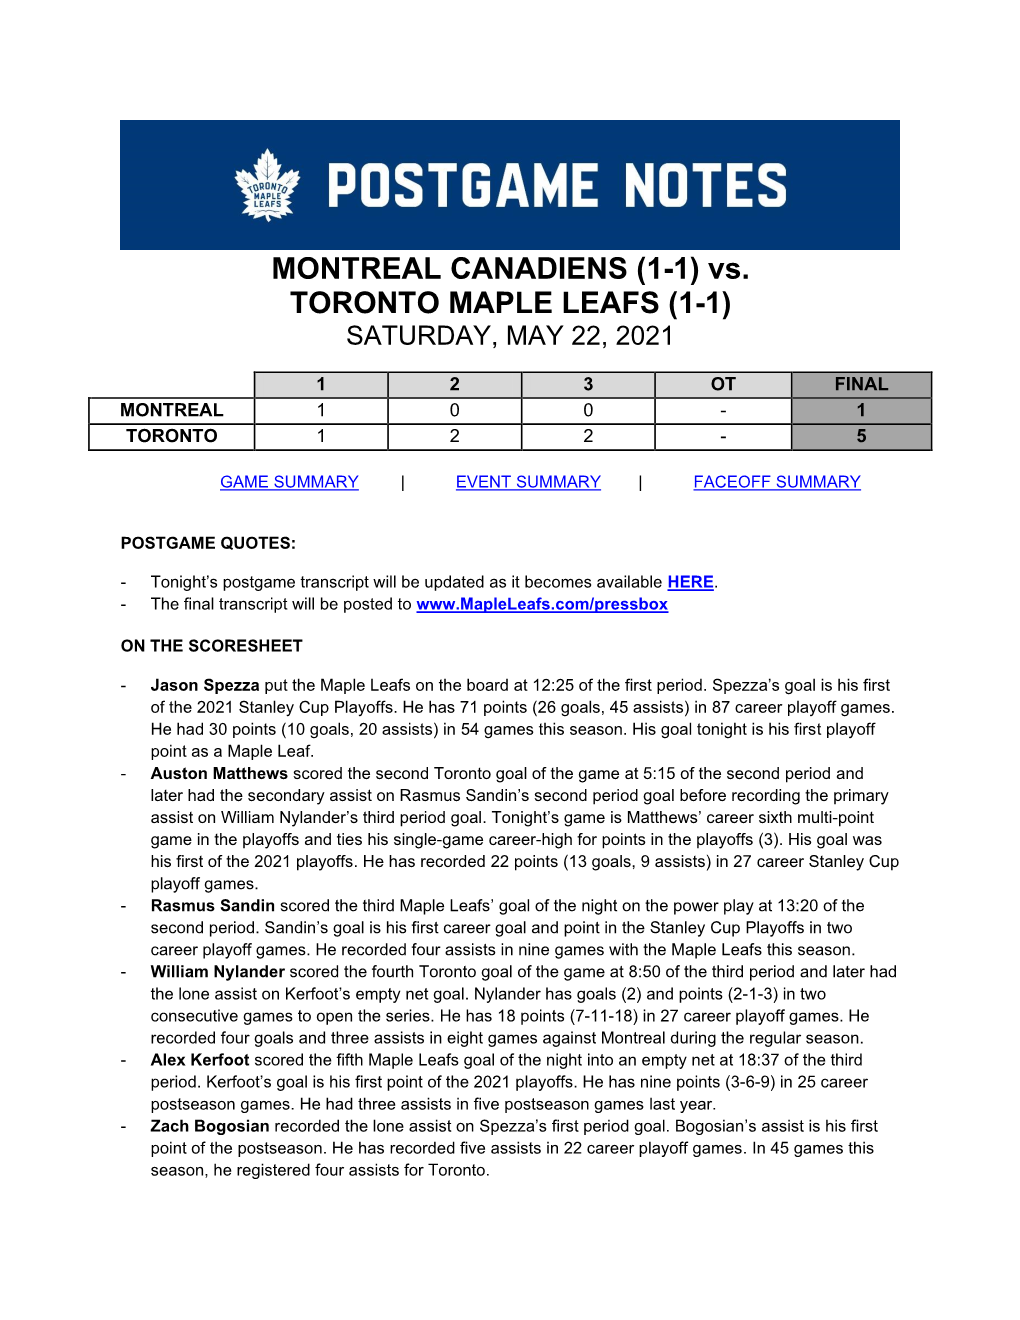 MONTREAL CANADIENS (1-1) Vs. TORONTO MAPLE LEAFS (1-1) SATURDAY, MAY 22, 2021